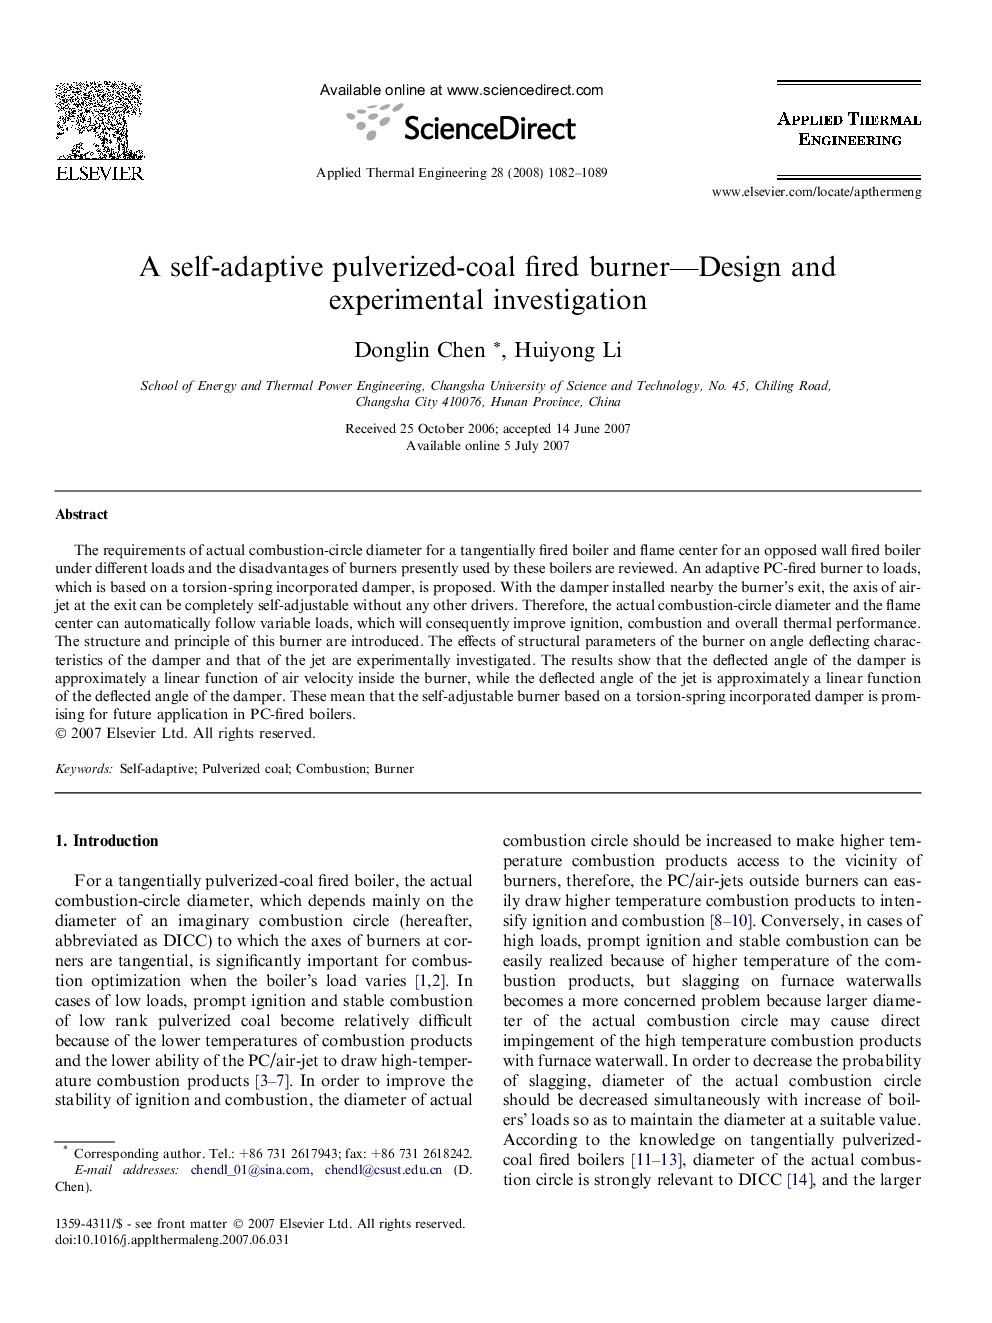 A self-adaptive pulverized-coal fired burner-Design and experimental investigation